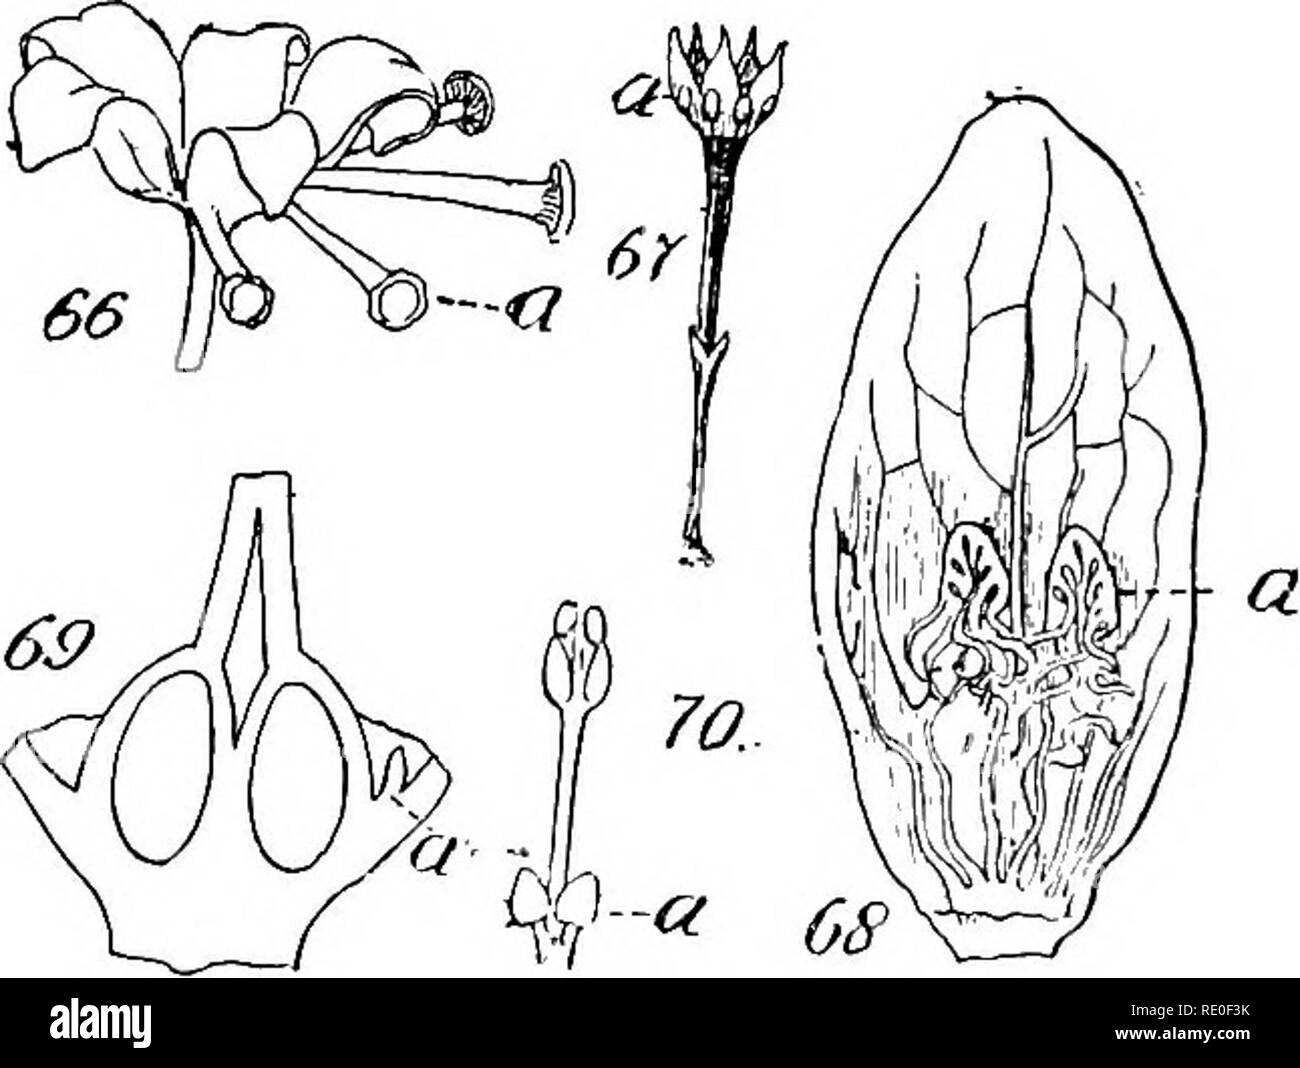 . A manual of structural botany; an introductory textbook for students of science and pharmacy. Plant morphology. Fig. 63. (a) frontal; (6) lateral, views of base of petal of buttercup, showing a scale which retain nectar in nectary. 64. Petal of Coptis, hollowed to form a nectary. 65. Long hollow spur forming nectary in fiower of Delphinium.. Fig. 66. Stalked glands (a) on calyx of Dinemandra. 67. Sessile glands (a). 6S. (a) Depressed glands (nectary) on petal of Frasera. 69. (a) Basal gland prevalent in the Apocynaceae. 70. (a) Glands at base of stamen of Sassafras. of the flower or plant. T Stock Photo